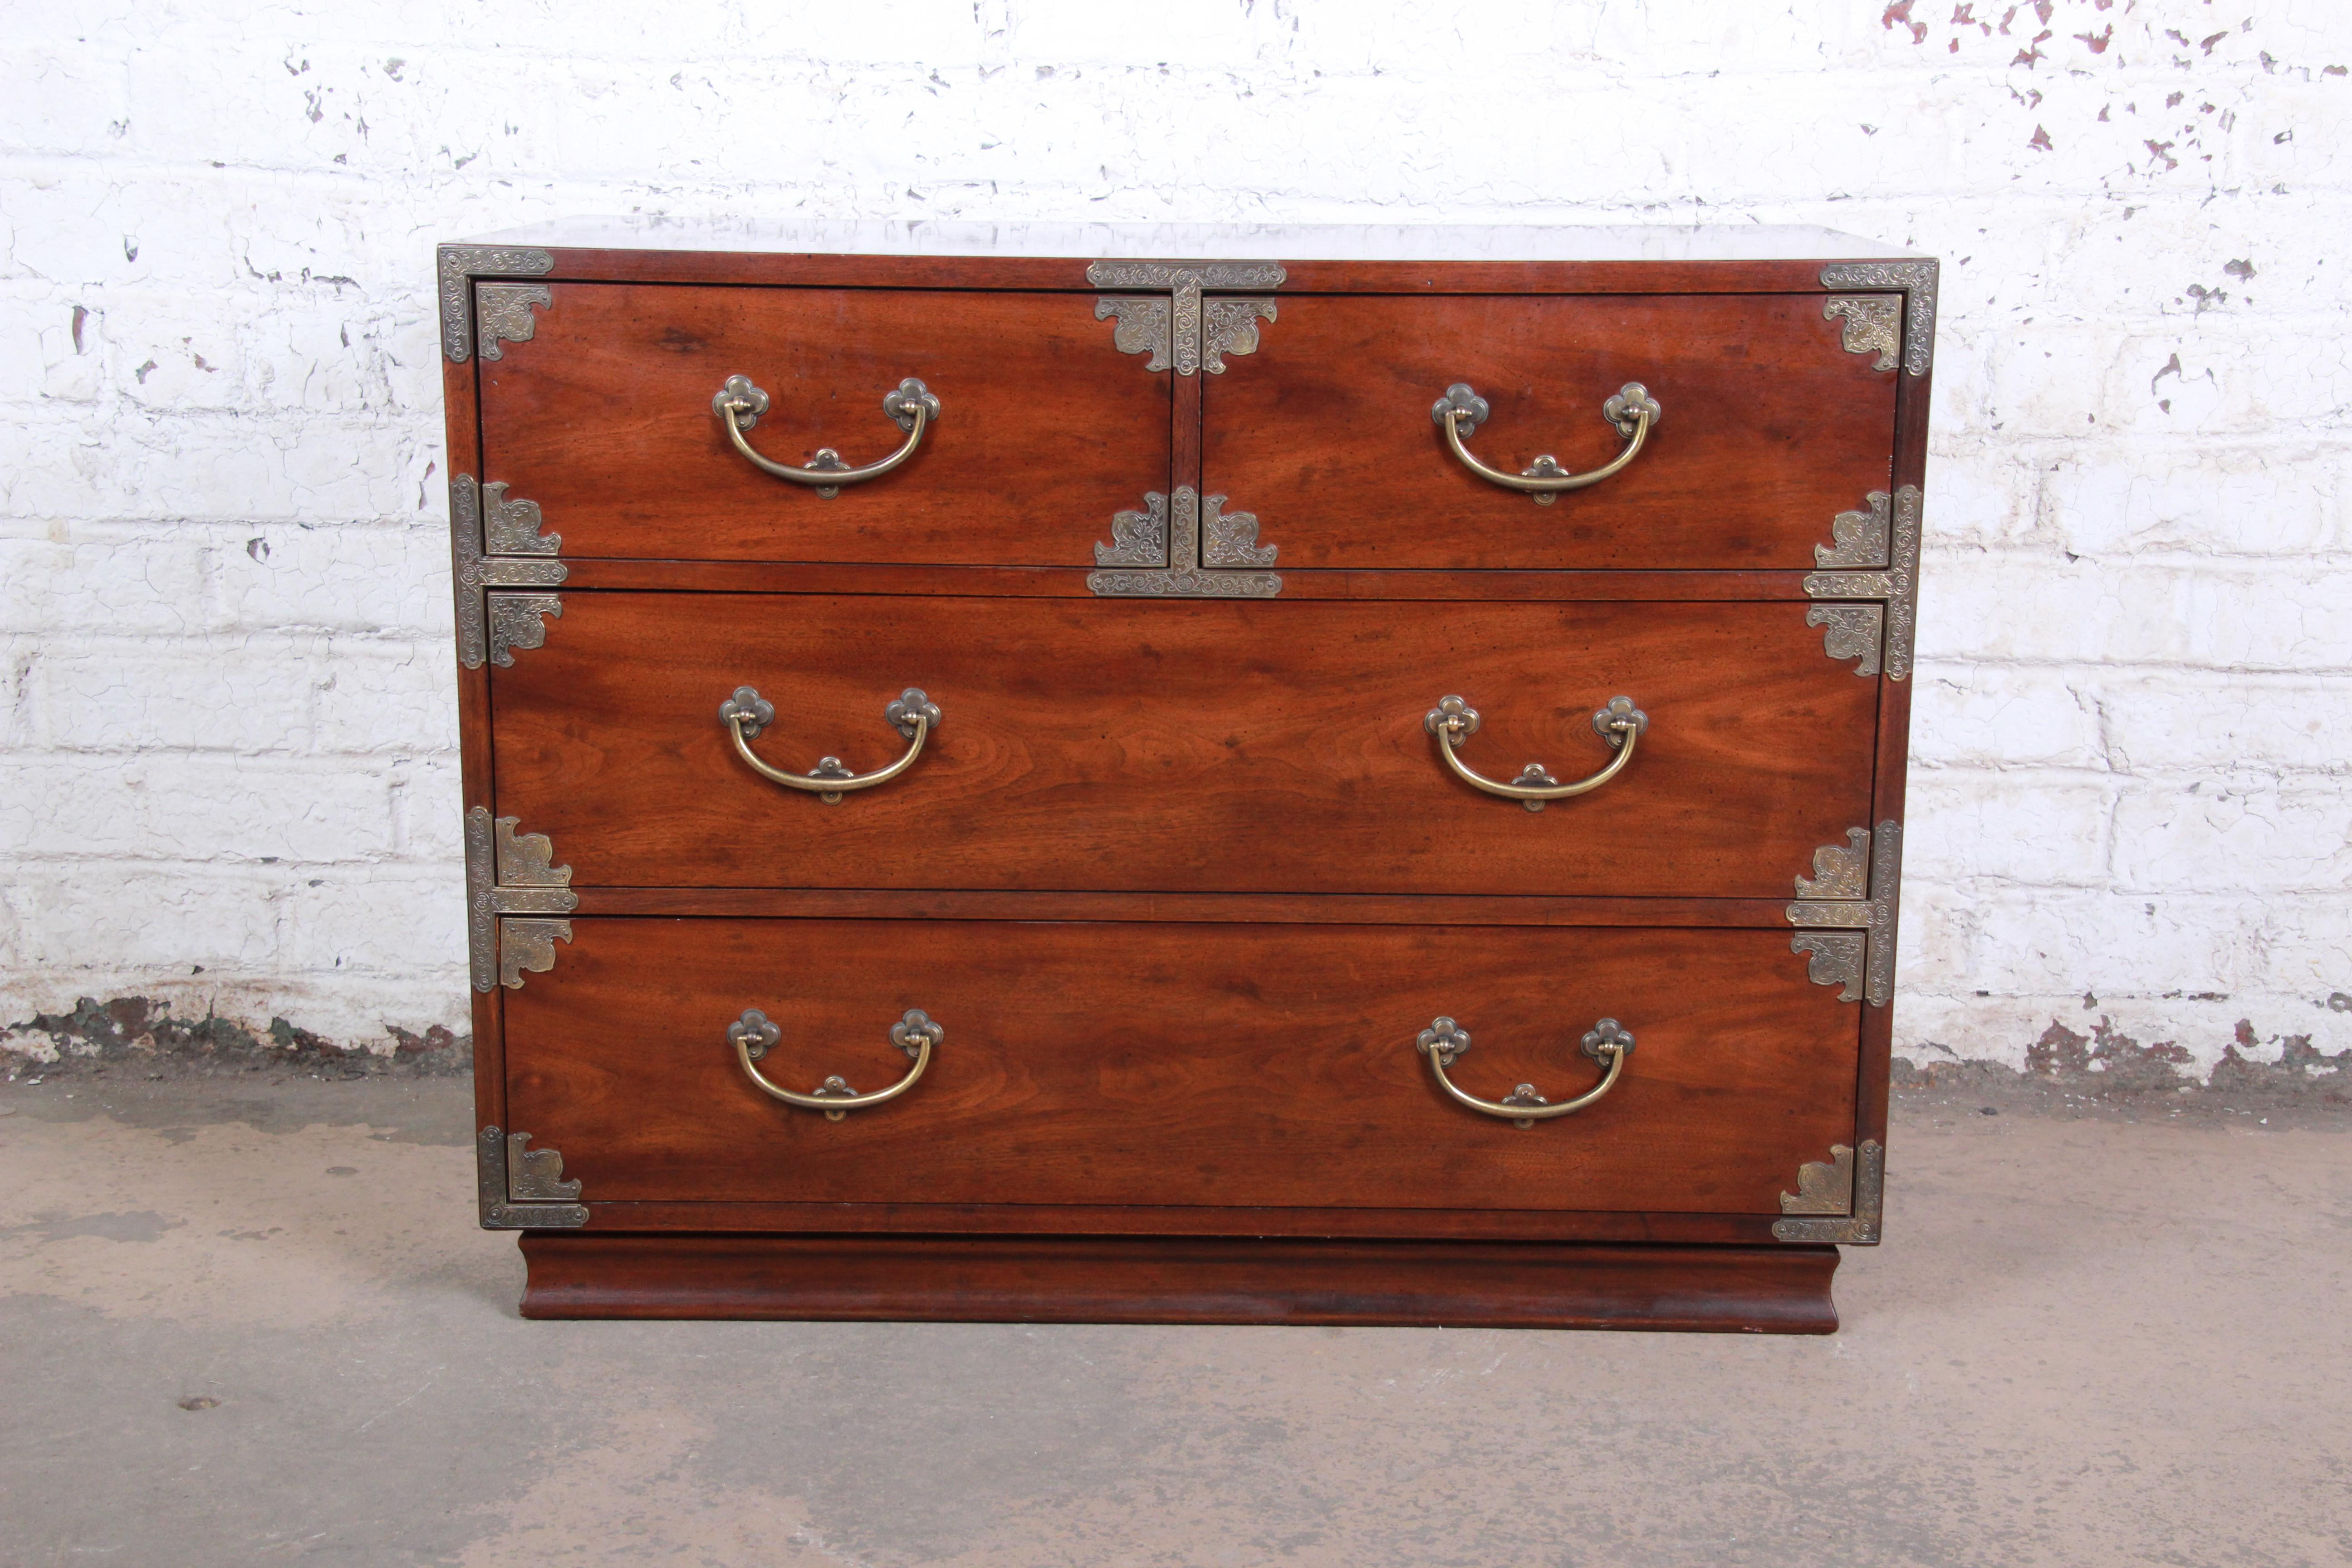 An exceptional Hollywood Regency Campaign style chest of drawers by Henredon. The dresser features stunning walnut wood grain, with original Asian-inspired brass hardware and accents. It offers ample storage, with four deep dovetailed drawers. The